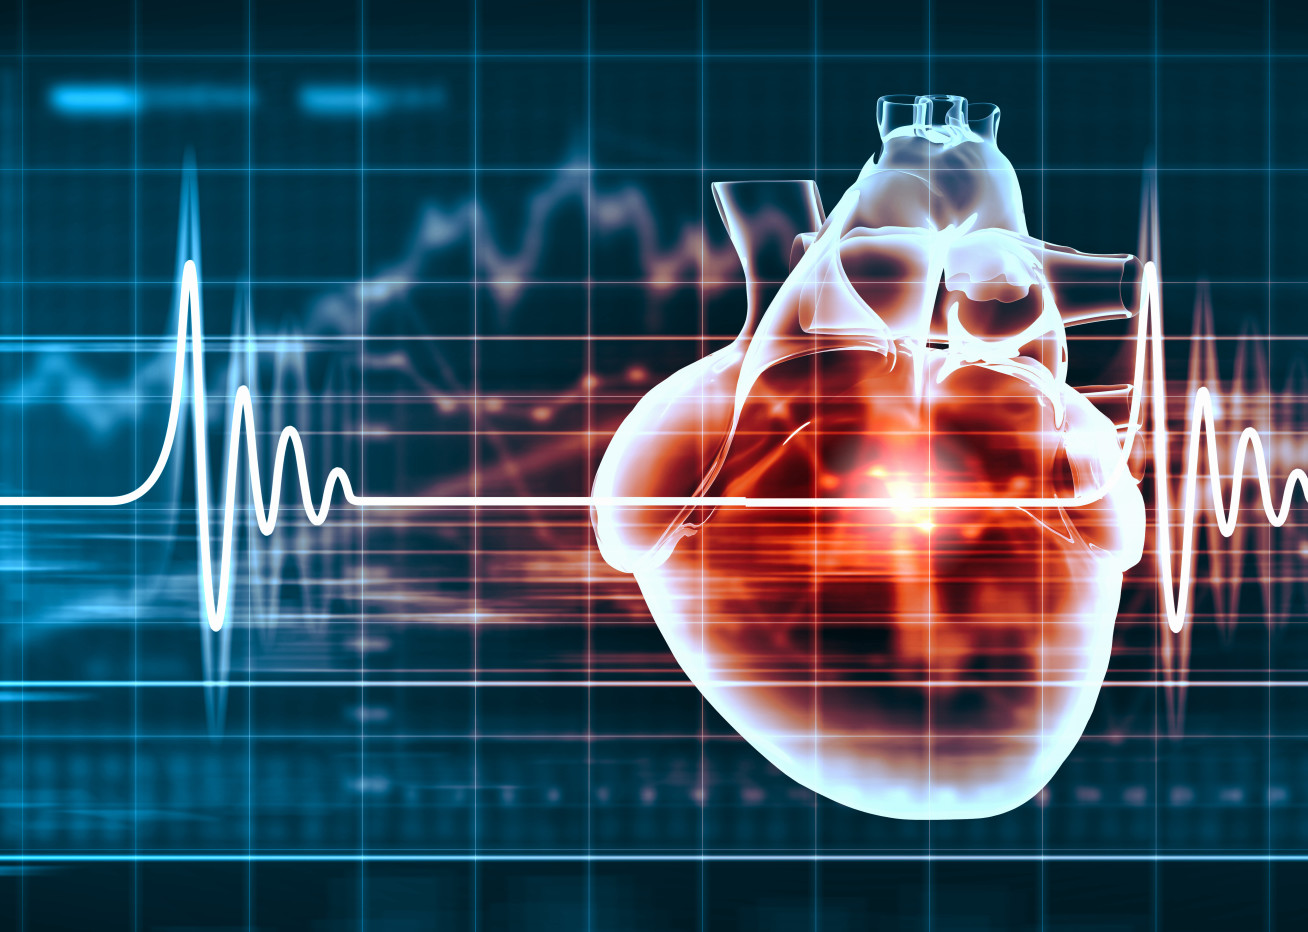 A digital image of a heart and heart-rate monitor.